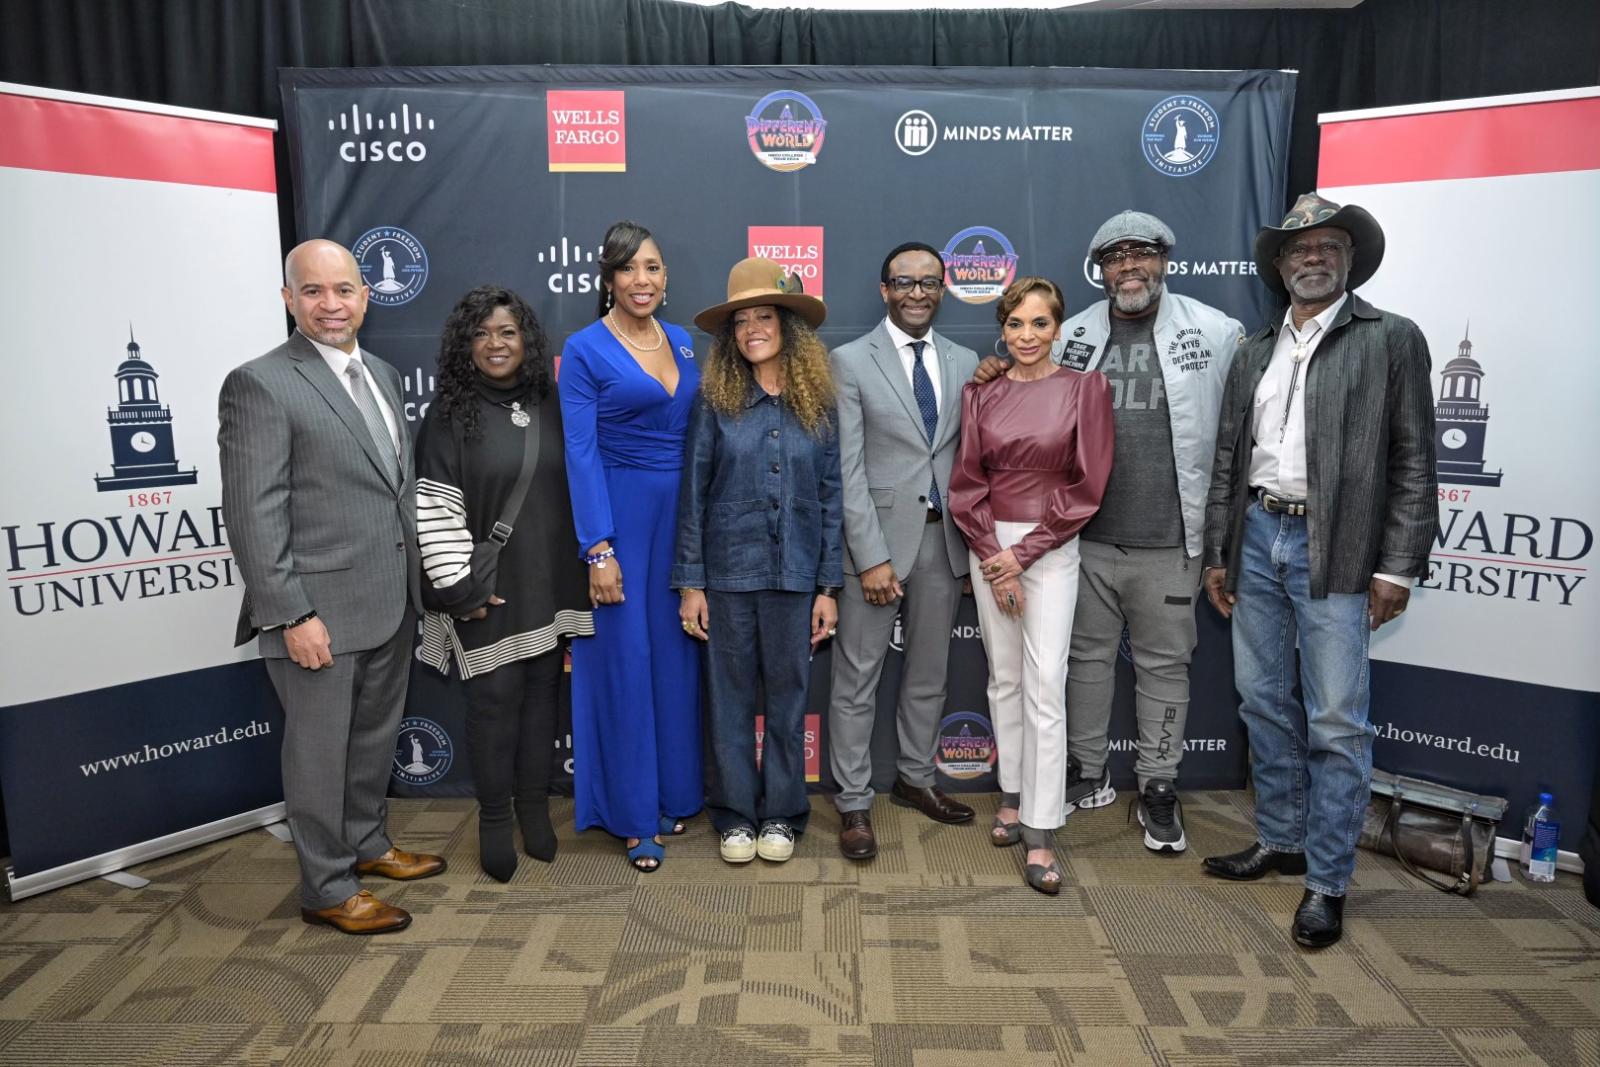 The cast of "A Different World" with President Vinson